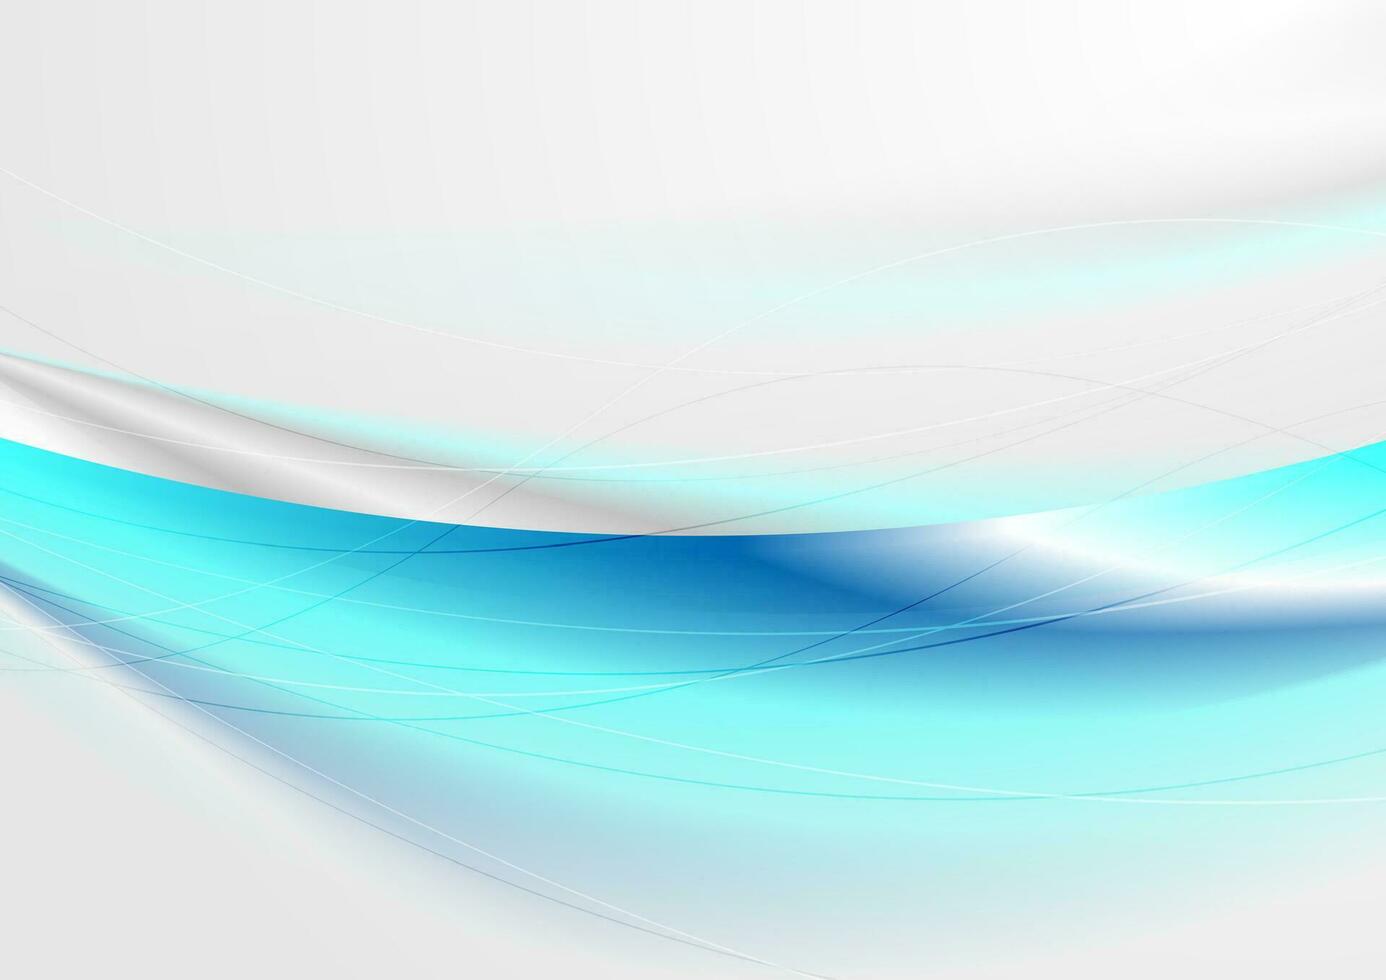 Blue white glossy smooth waves abstract background vector